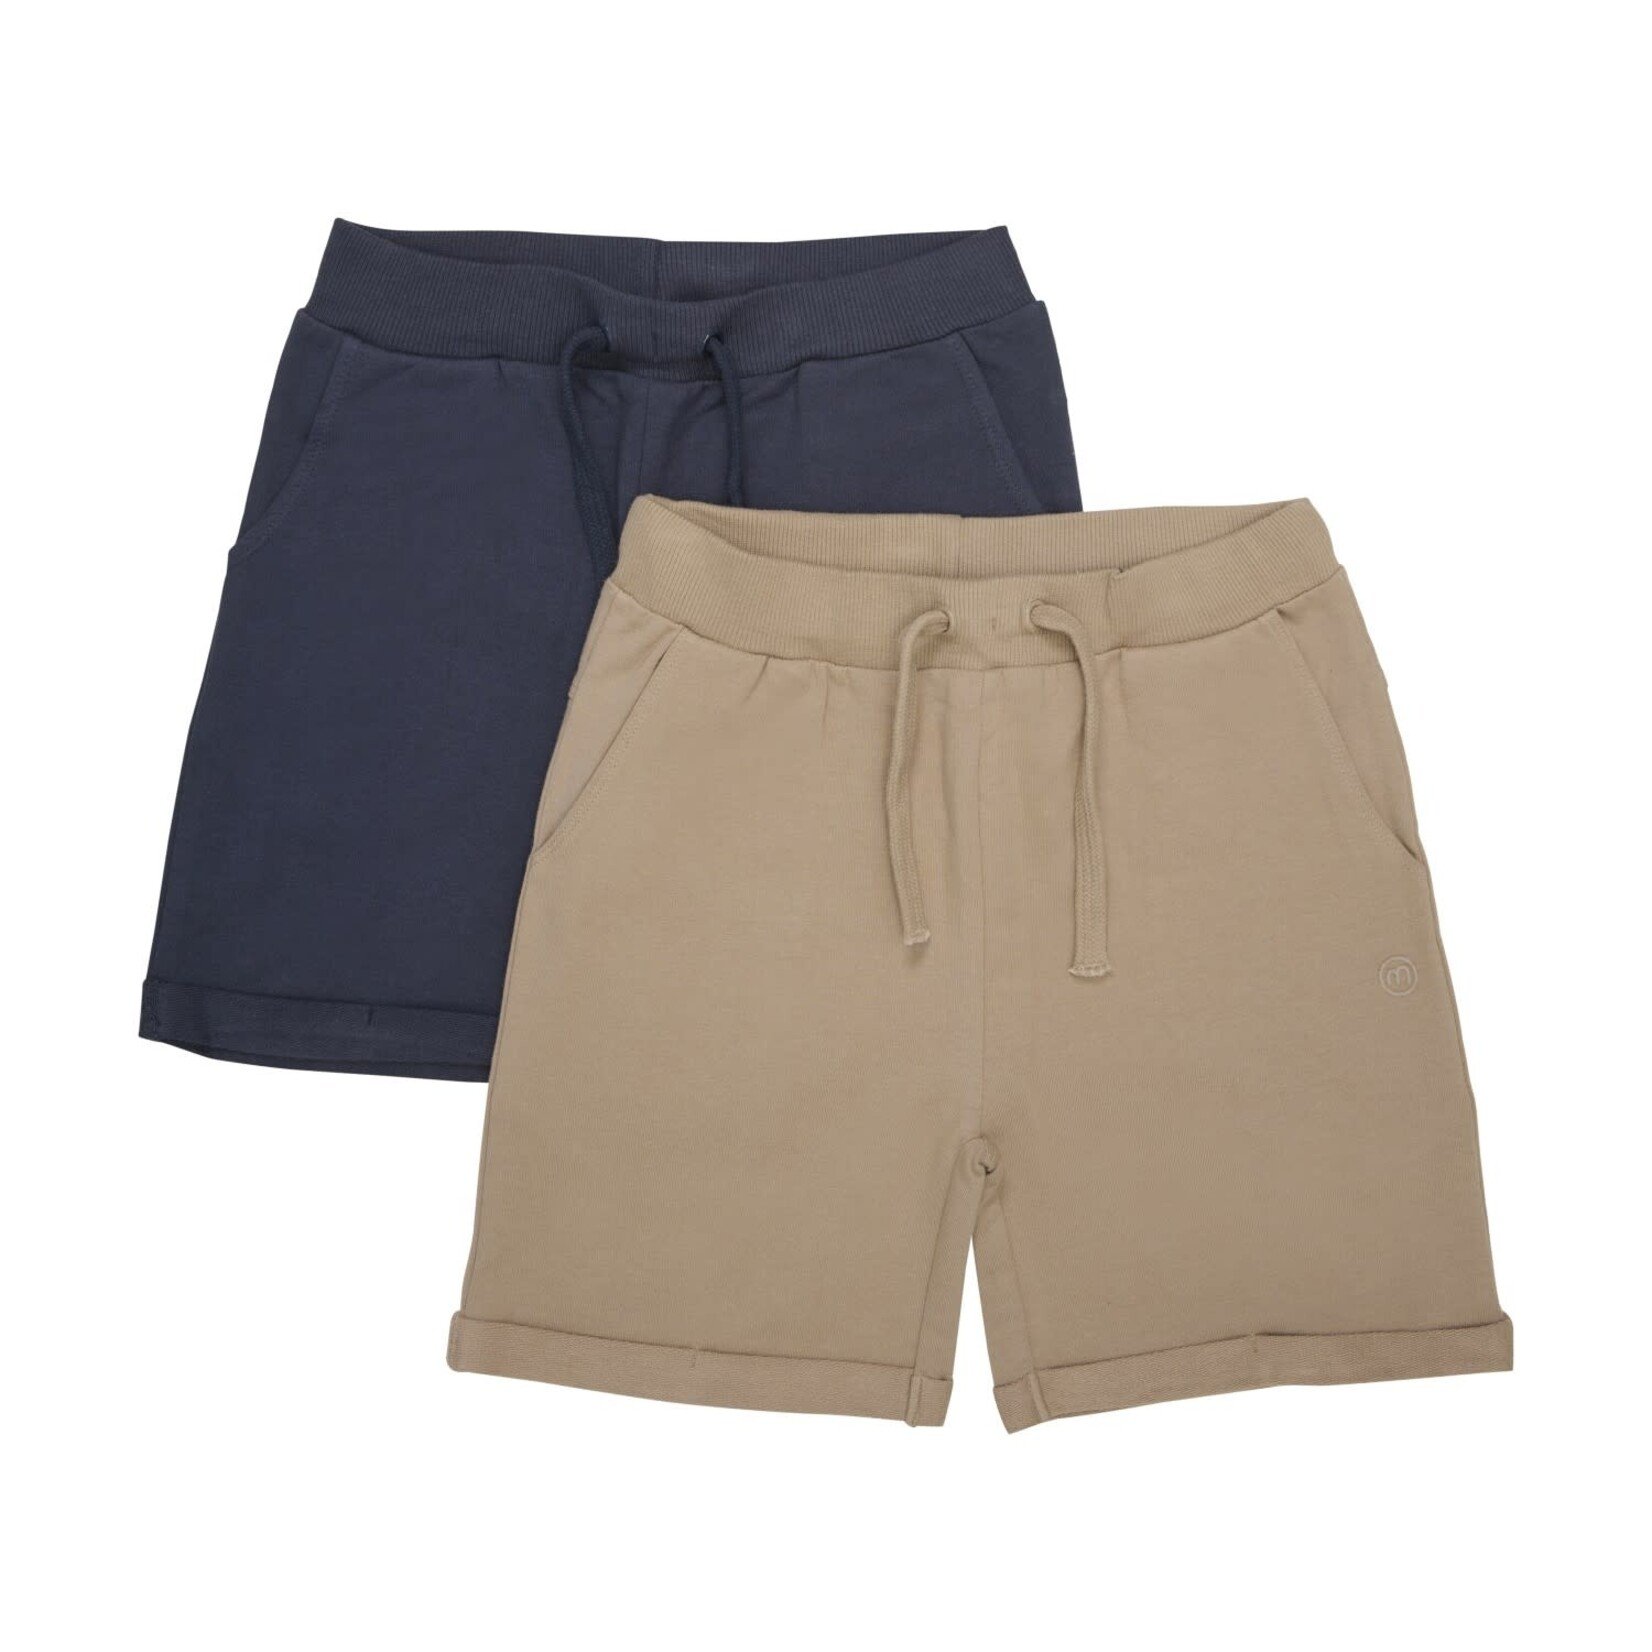 Minymo MINYMO - Set of 2 organic cotton shorts in navy blue and beige brown